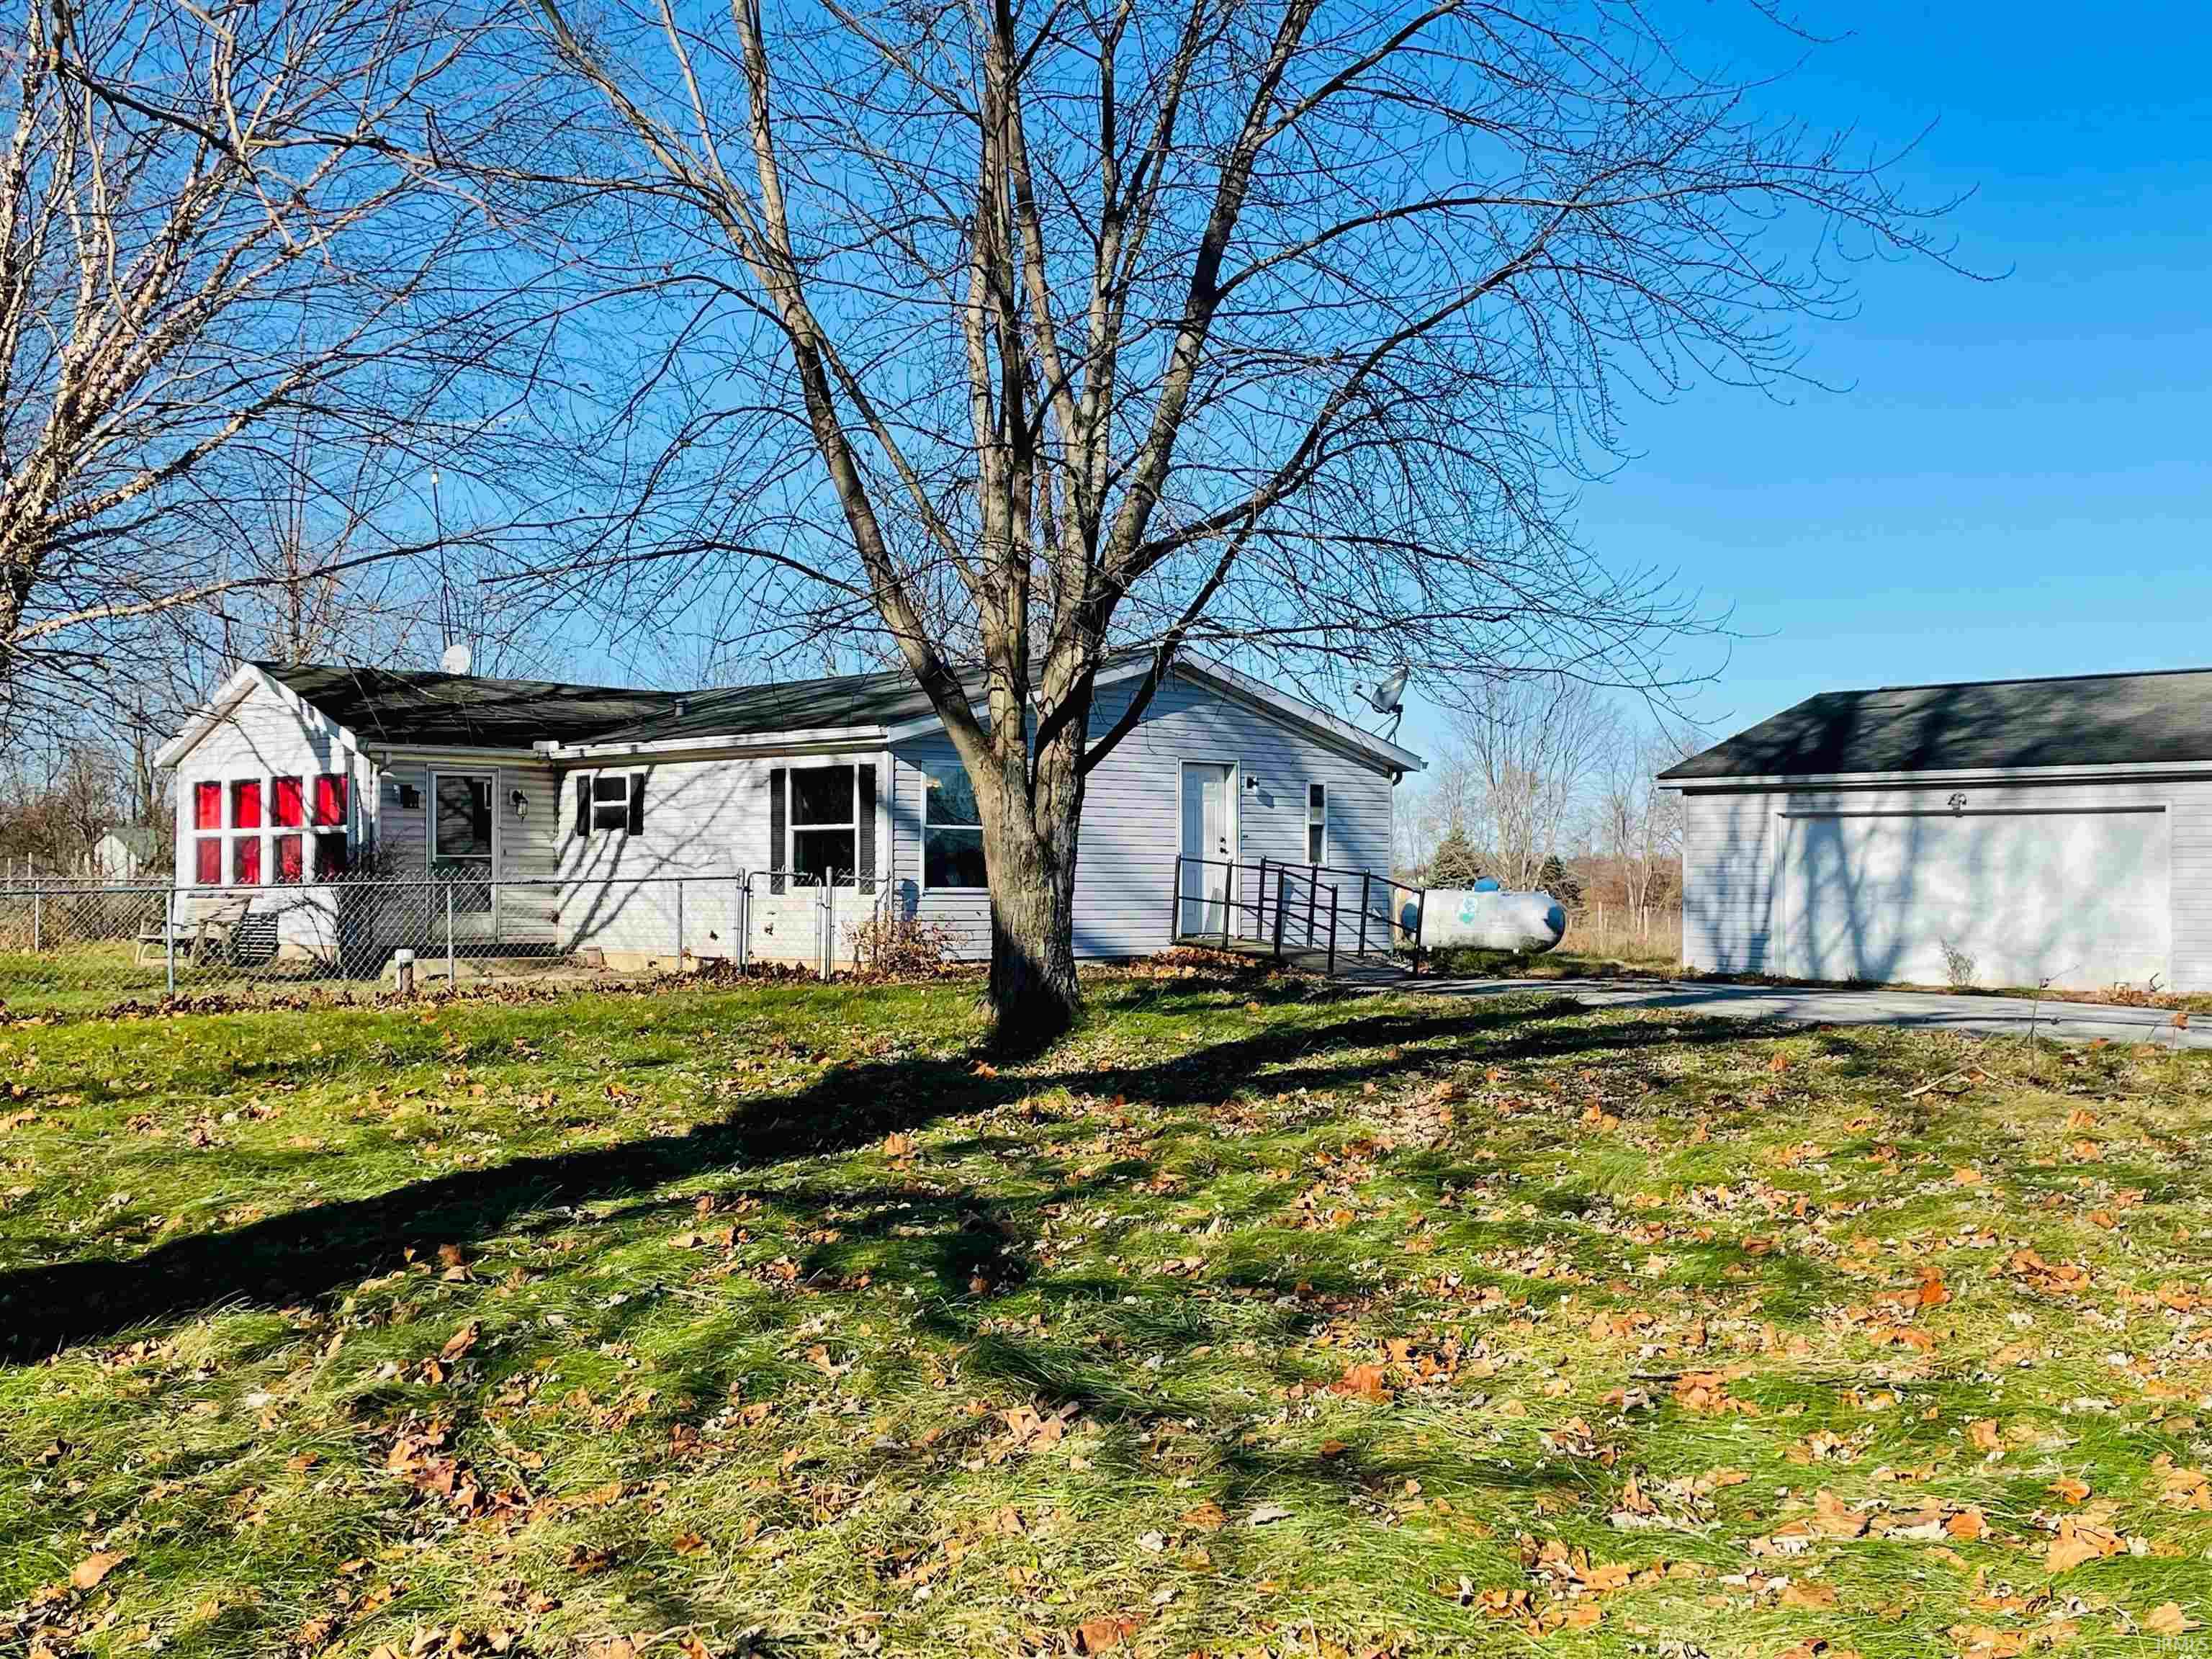 All the country charm, yet close to two towns. This 3 bedroom, 2 bath home bordering Whitley and Noble County is sitting on 4 acres with beautiful views of Big Lake. Public access to both Big Lake and Crooked Lake are just minutes away.  Thinking of starting your own mini farm- this property features a fenced-in area and out building that is perfect for all types of animals. The current homeowners started remodeling the home- it just needs your touches to finish a few projects. Schedule your showing and make it yours today.